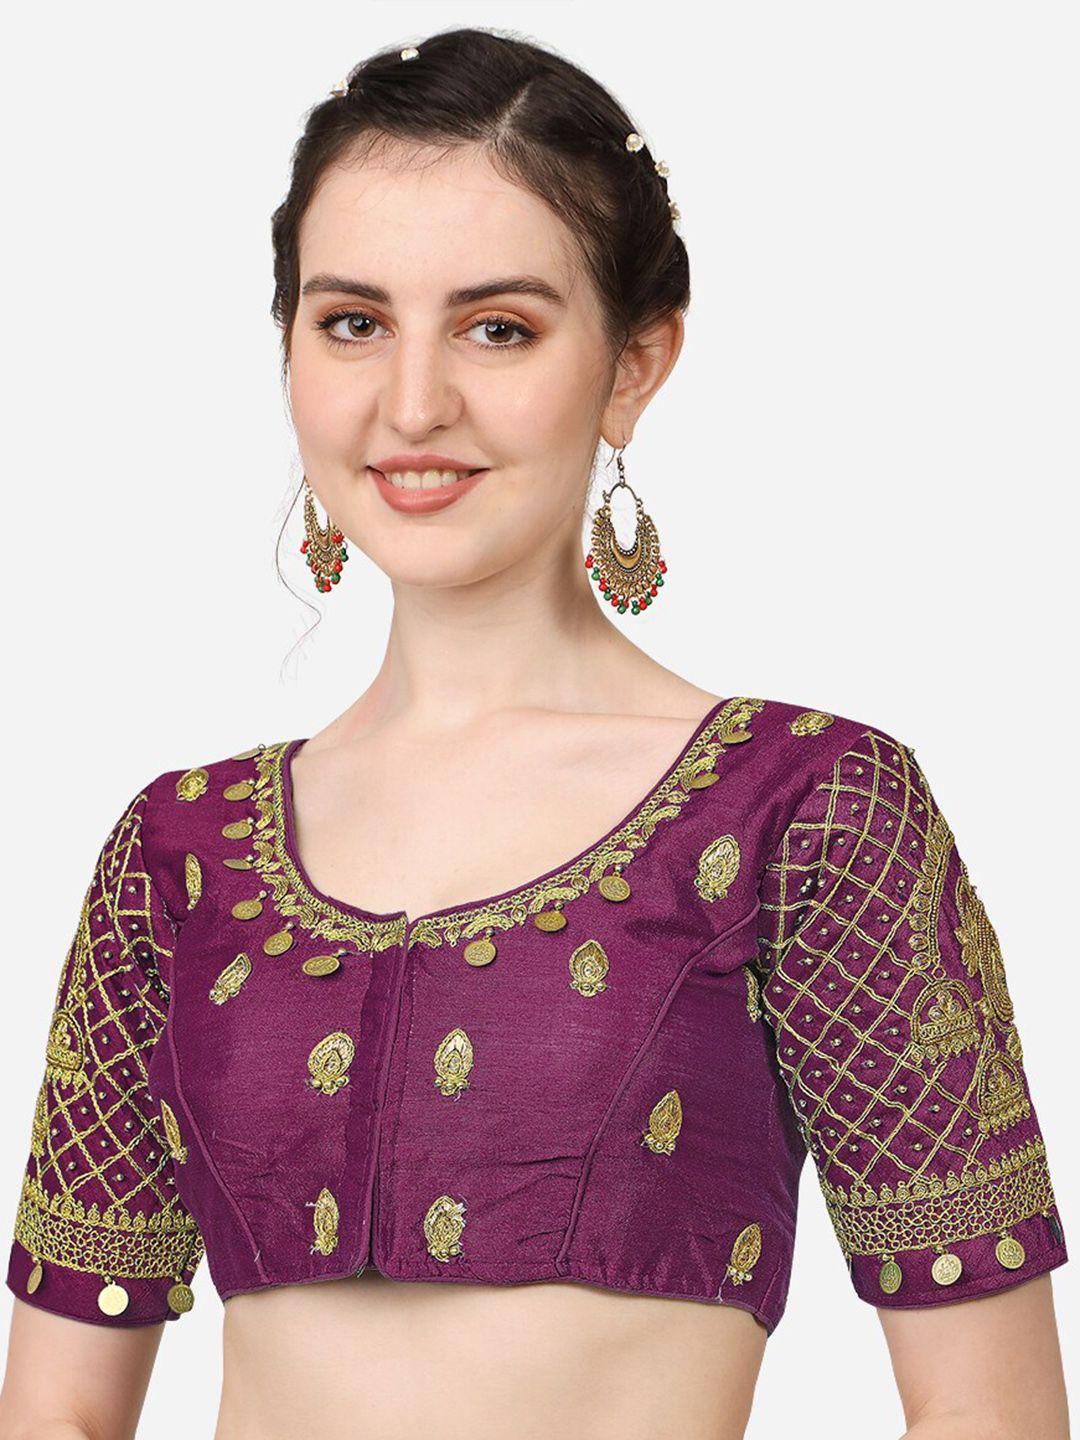 pujia mills  violet embroidered saree blouse